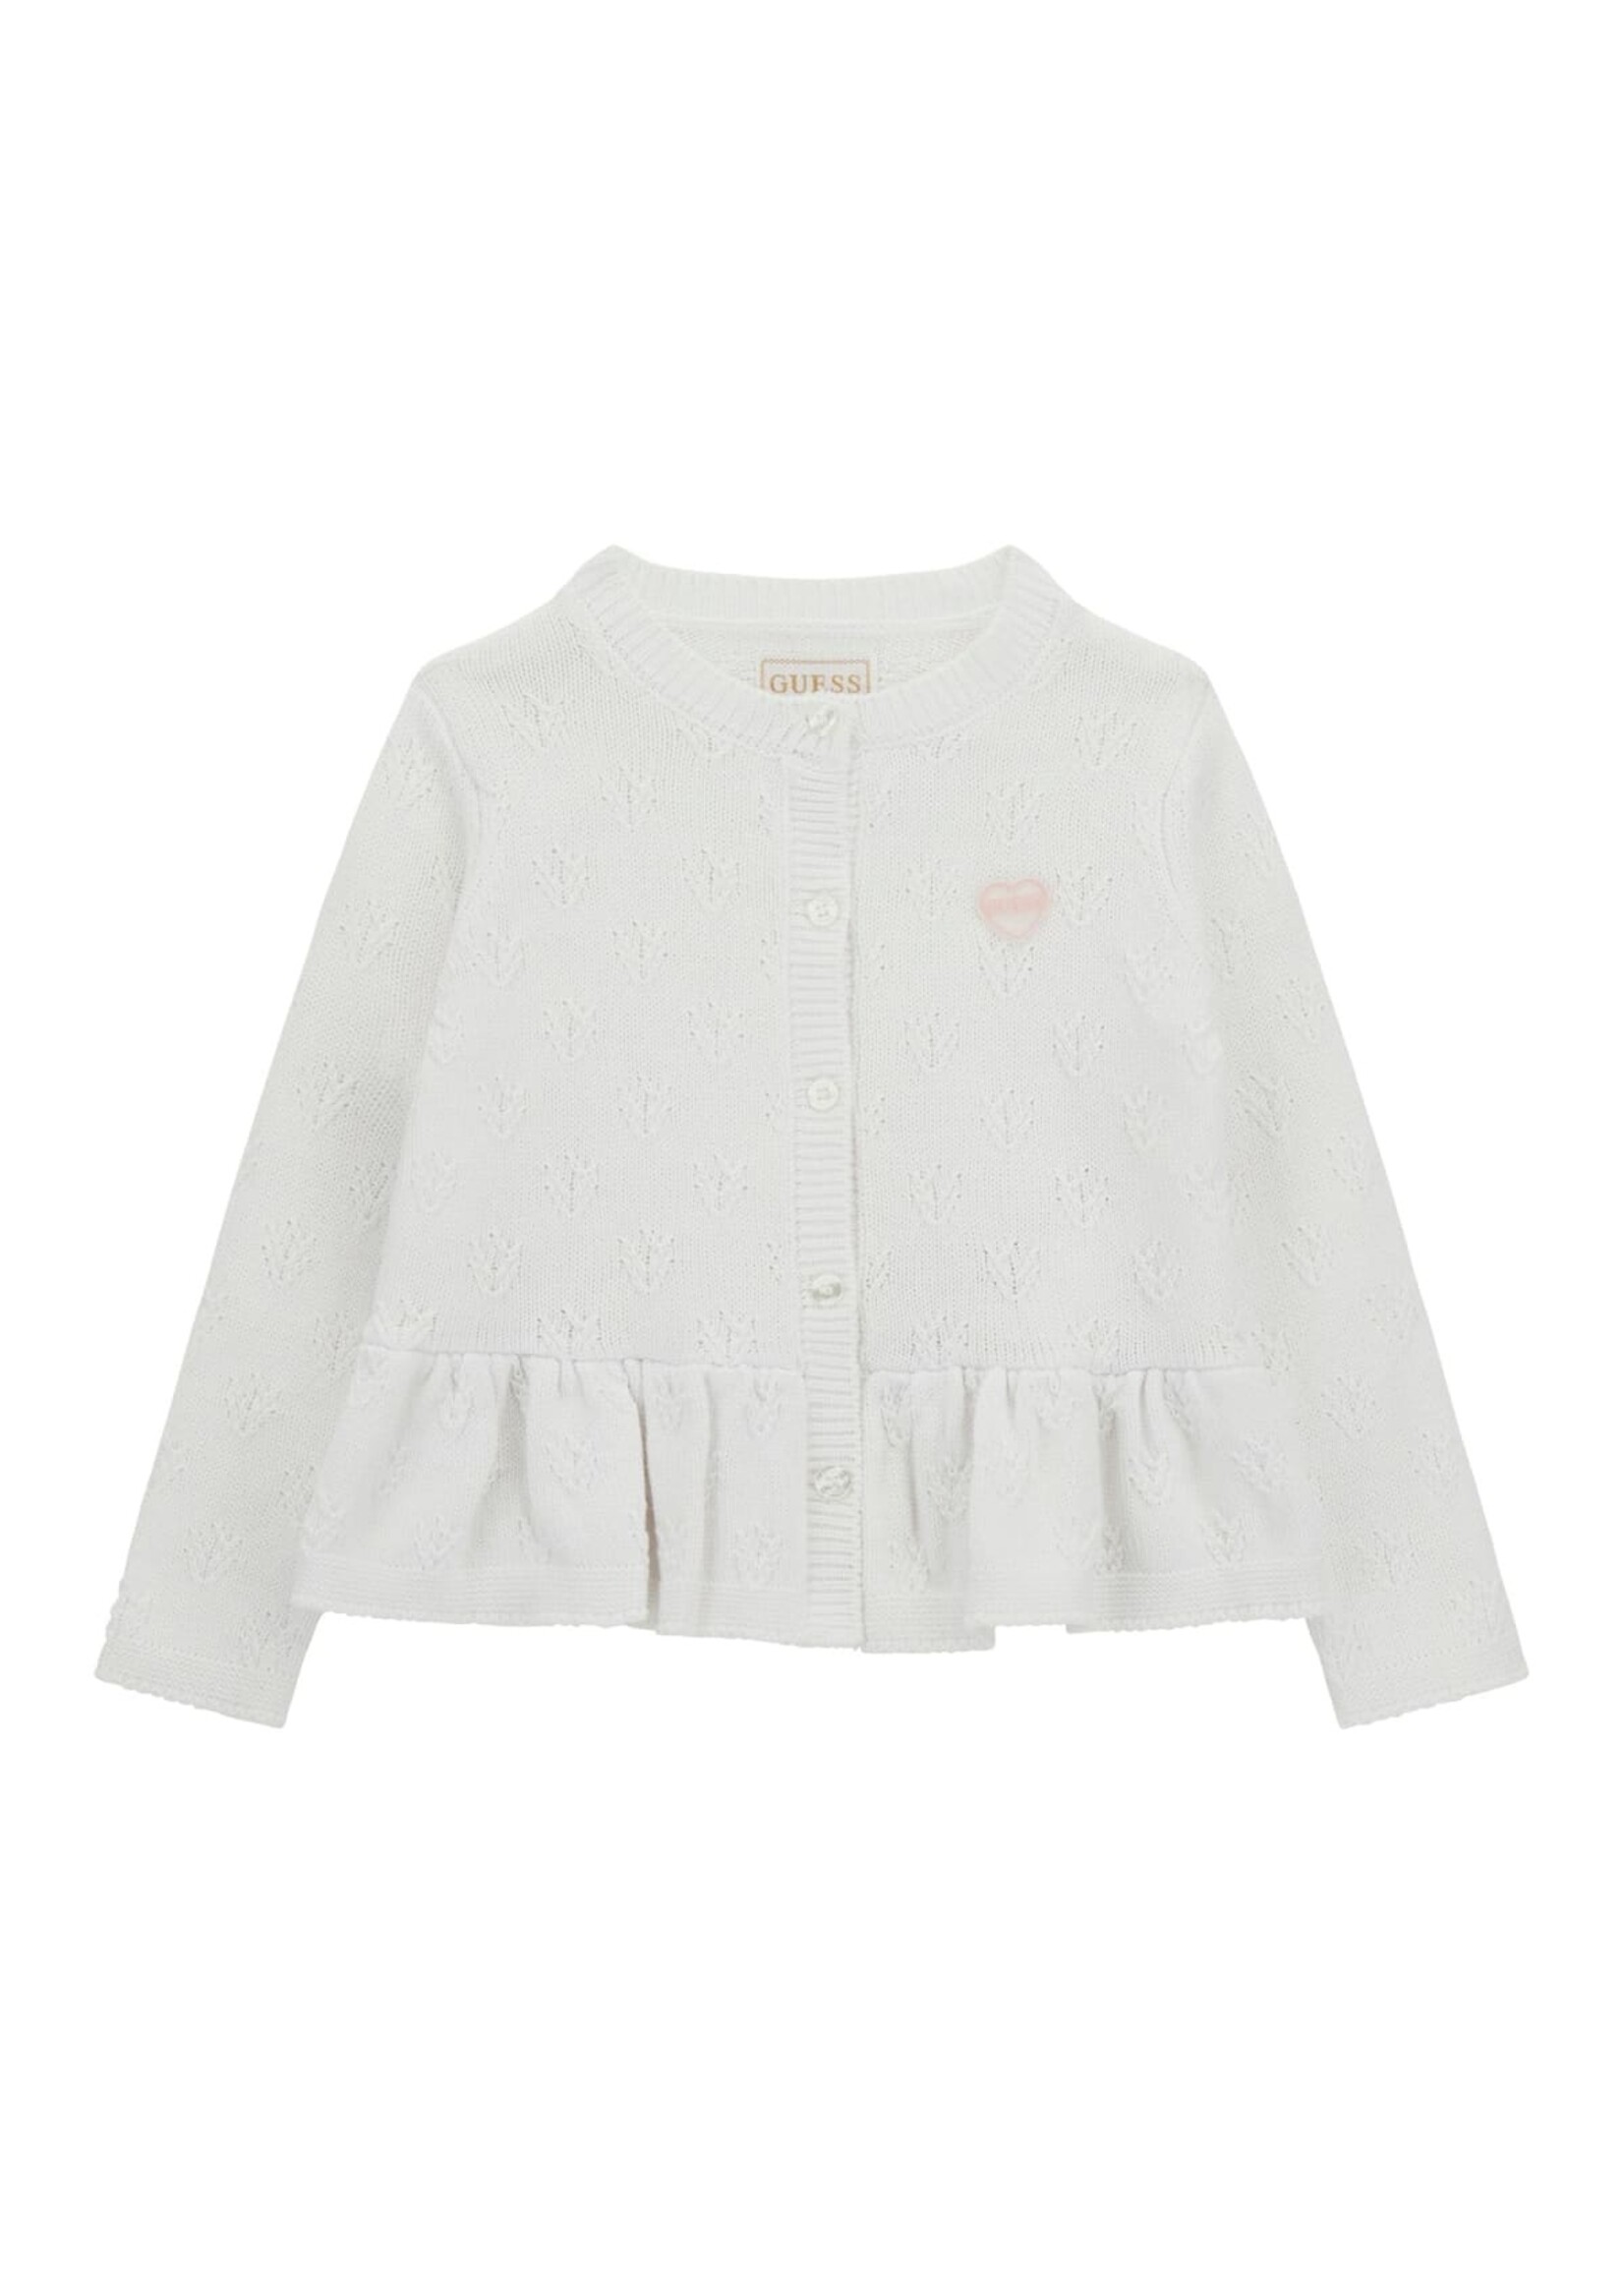 Guess K4GR00 LS CARDIGAN Pure White